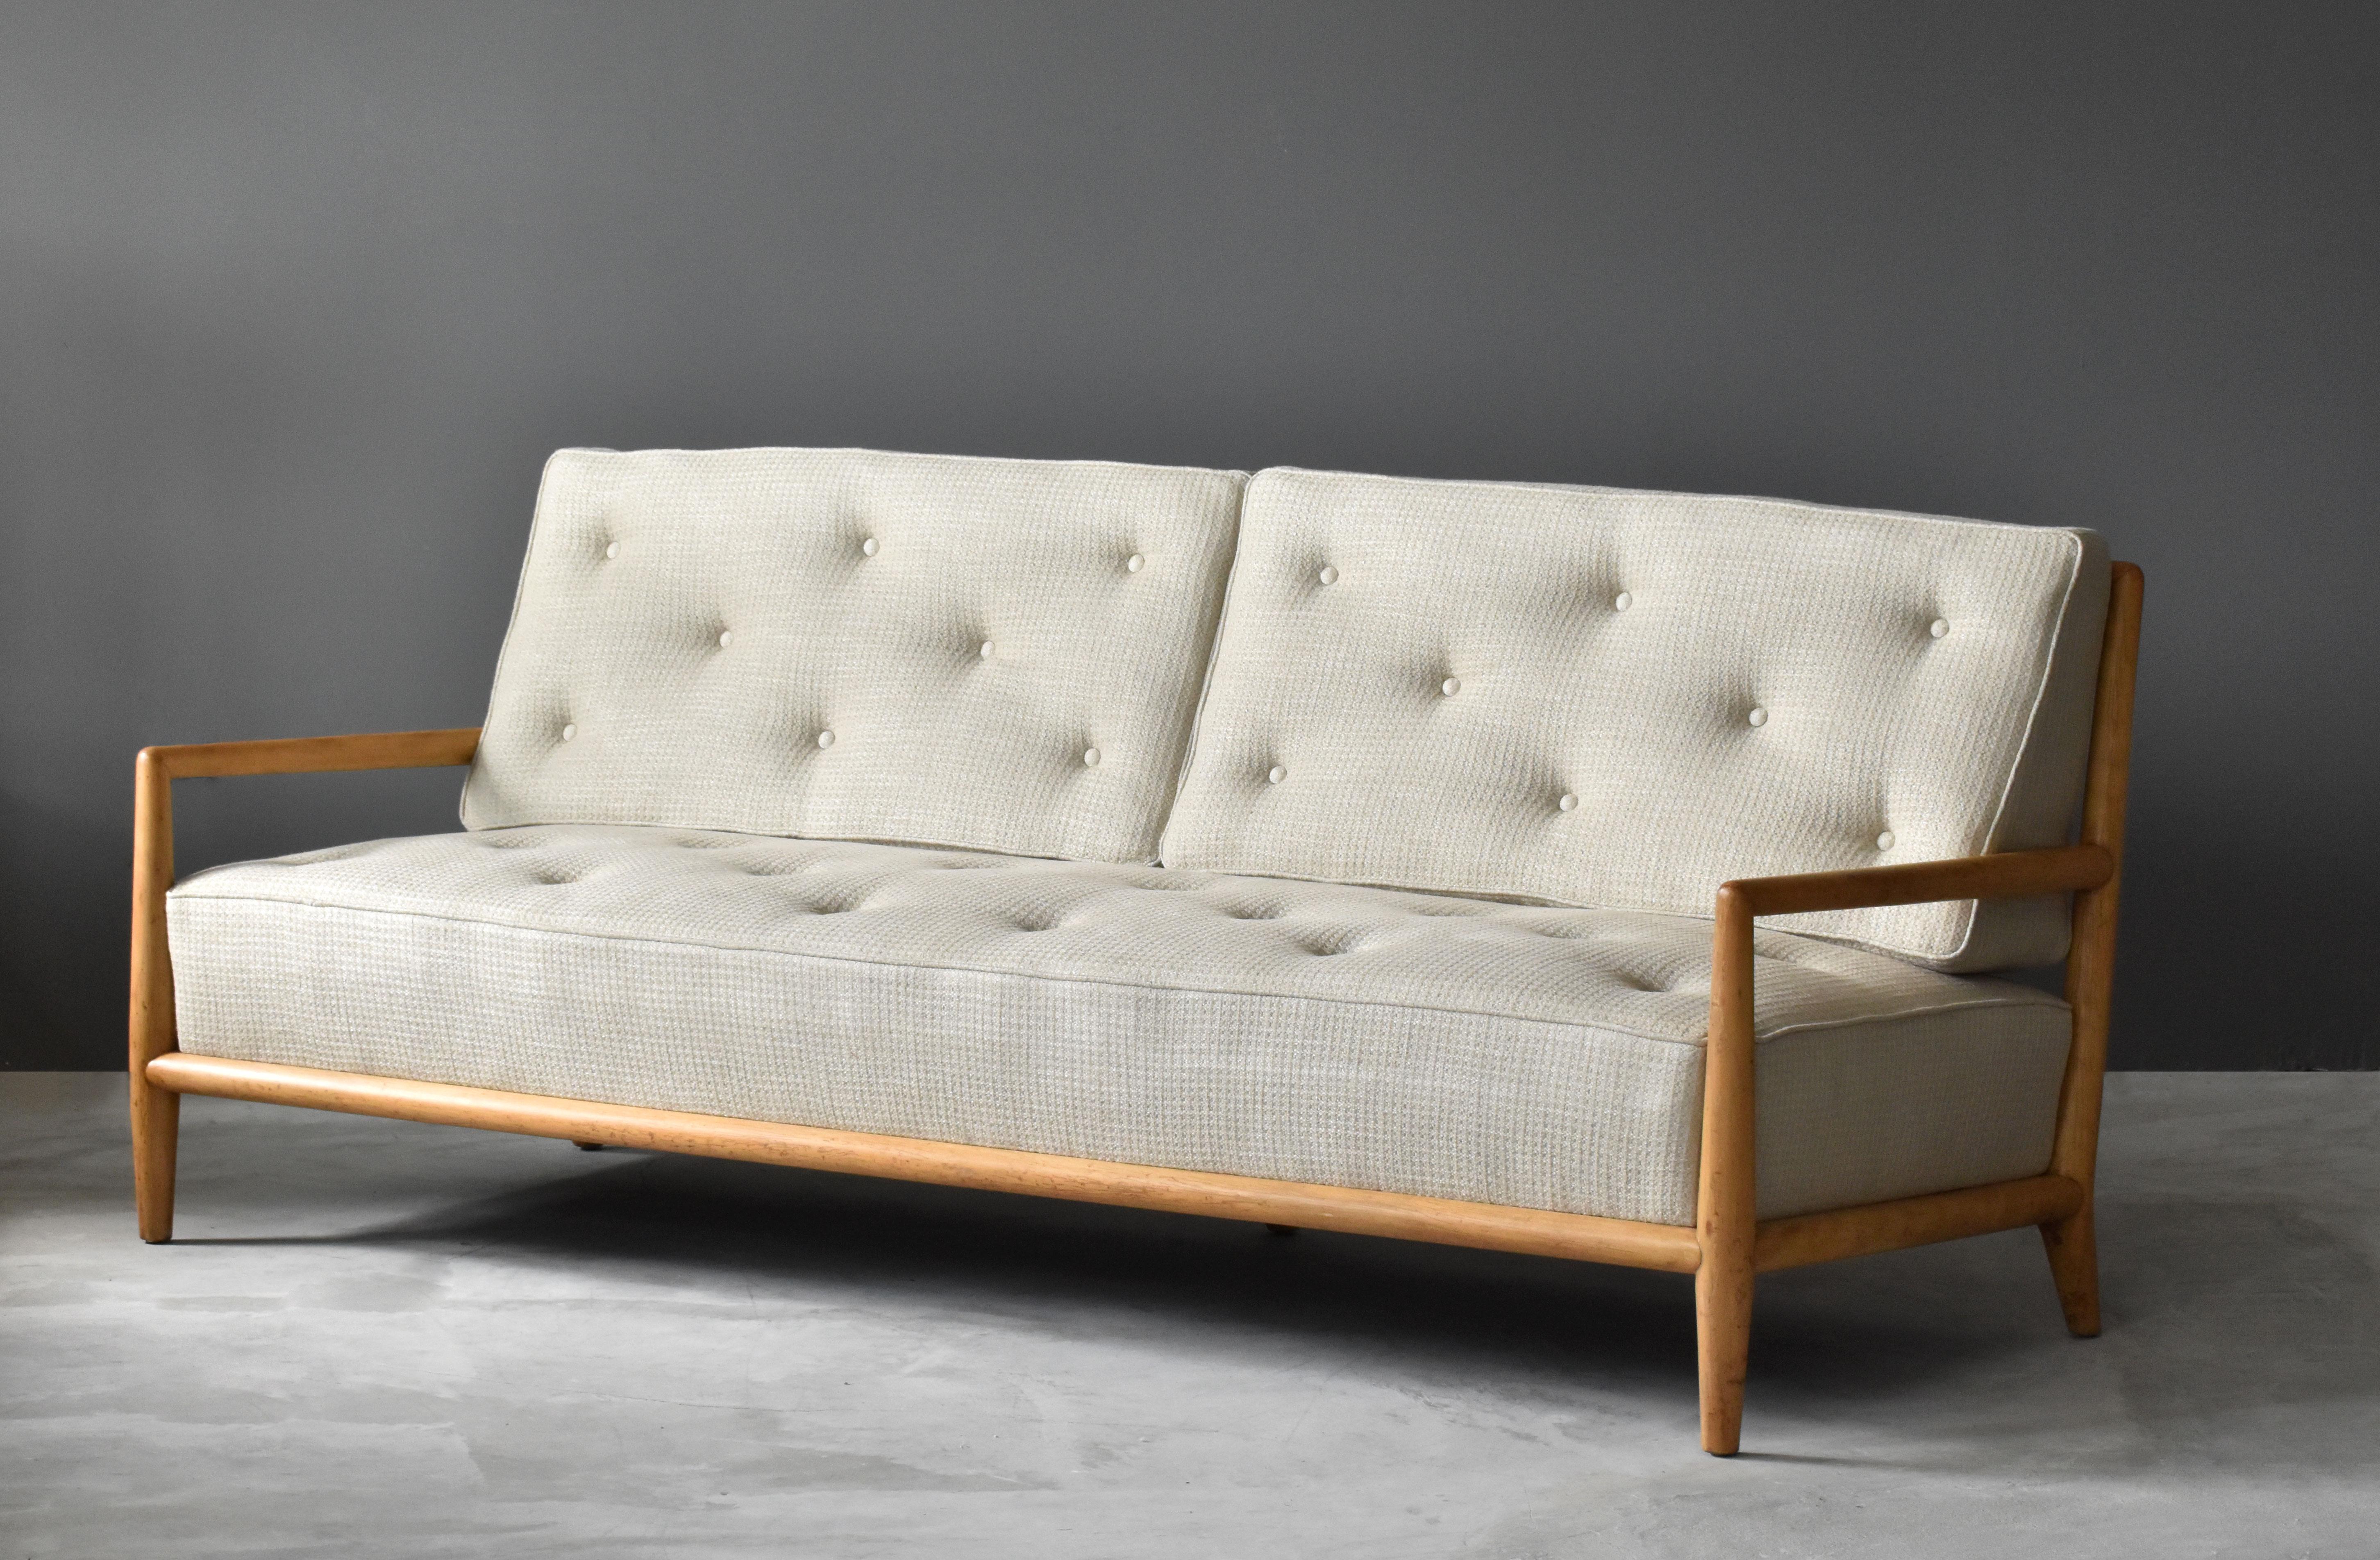 A sofa, model 1678, designed by T.H. Robsjohn-Gibbings for Widdicomb Furniture Company, Grand Rapids, Michigan. 

In his typical fashion, Robsjohn-Gibbings blends a modern expression with the restrained elegance of ancient Greek and Roman